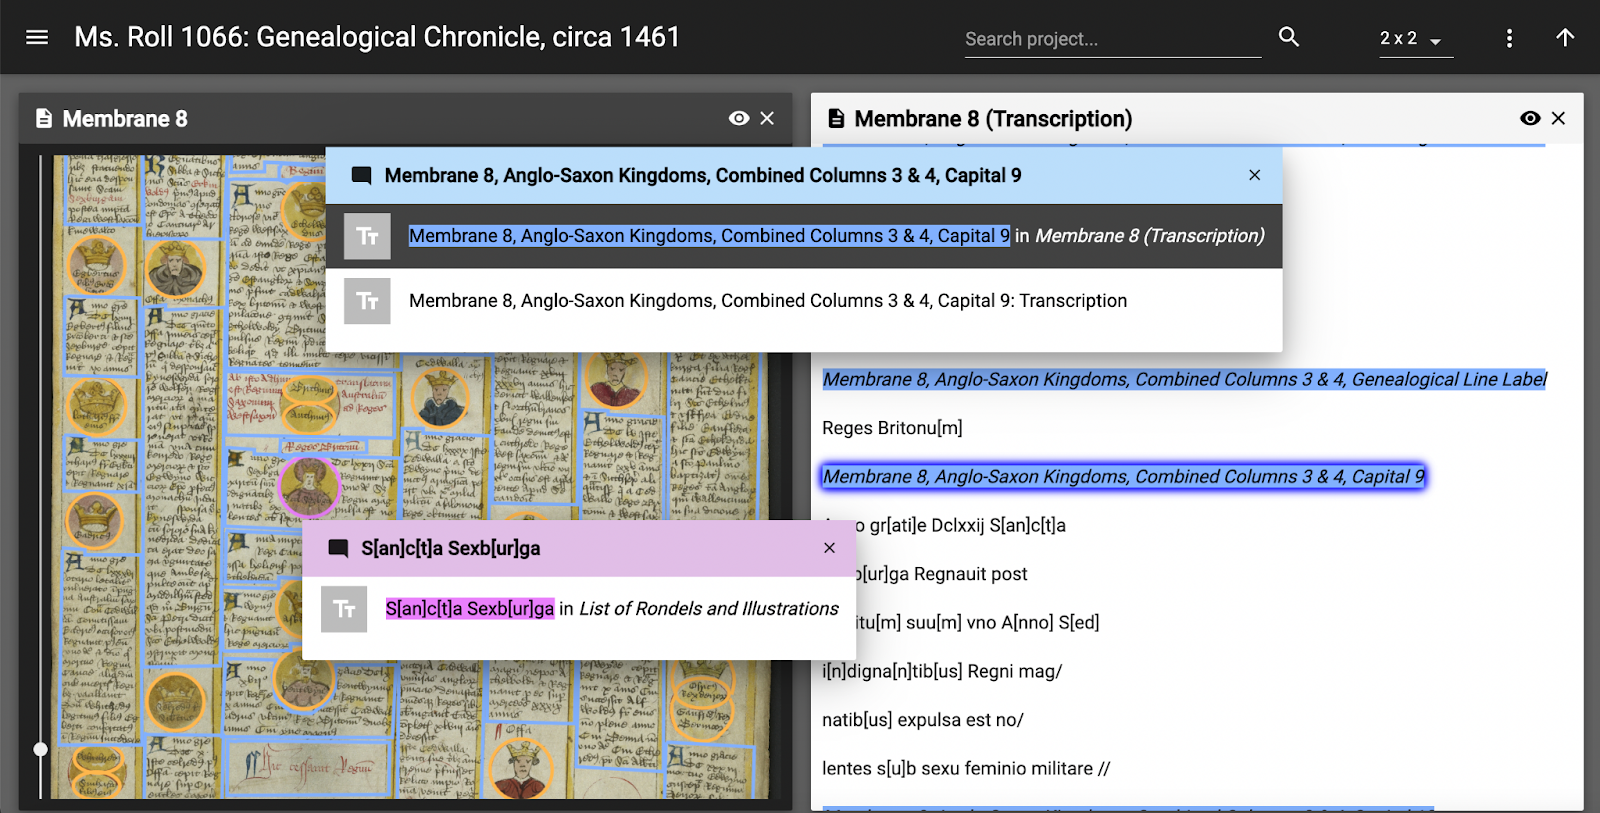 Example of selecting a paragraph and image from the manuscript to show their transcriptions.